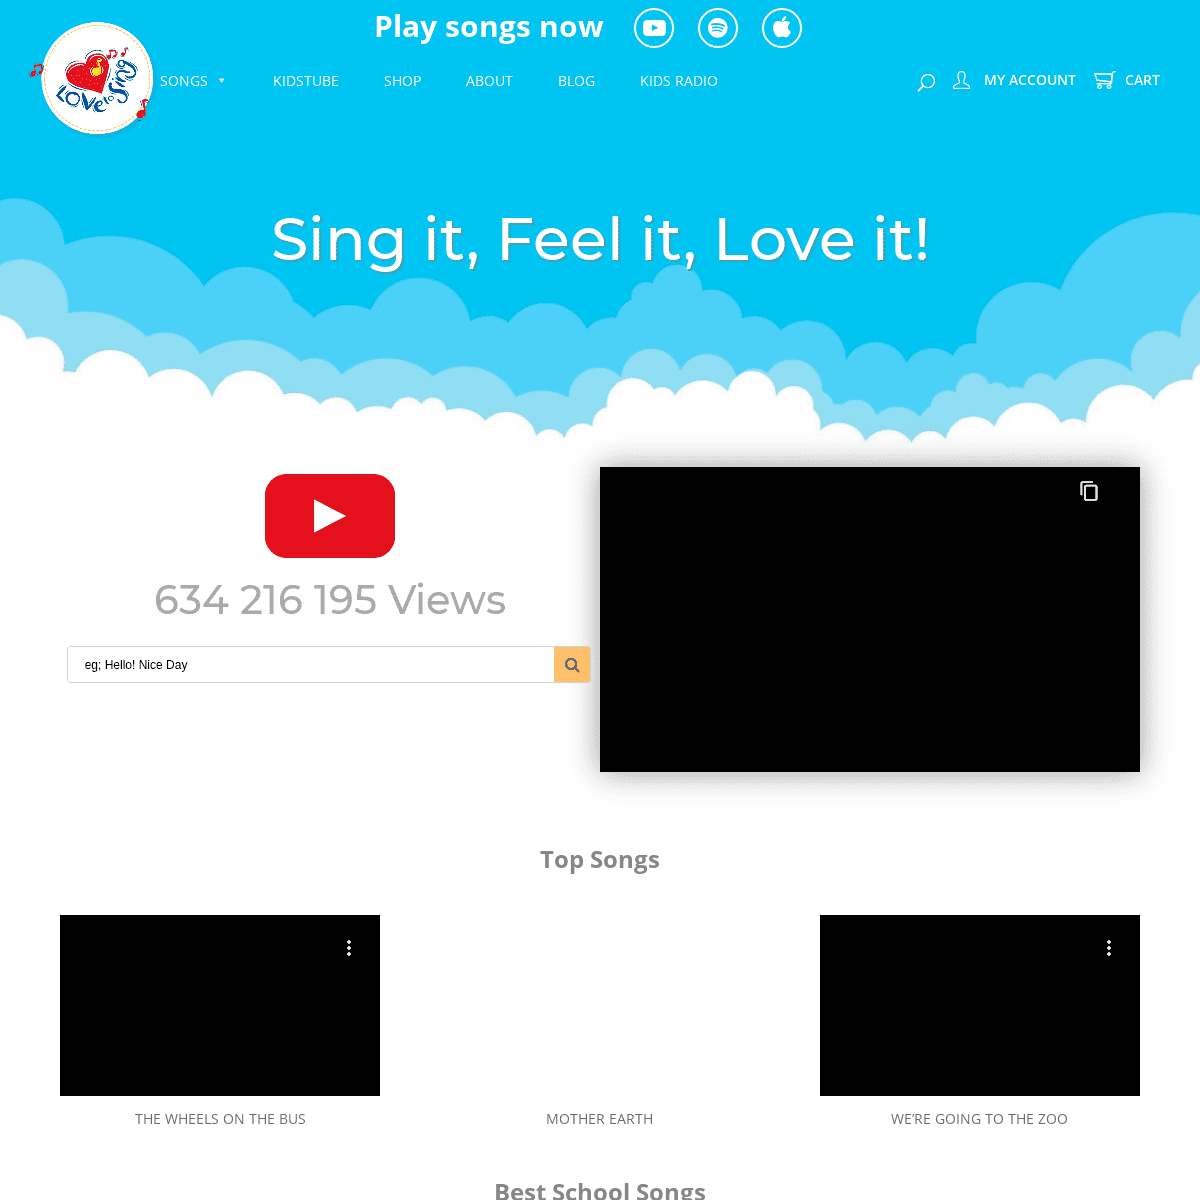 A complete backup of childrenlovetosing.com